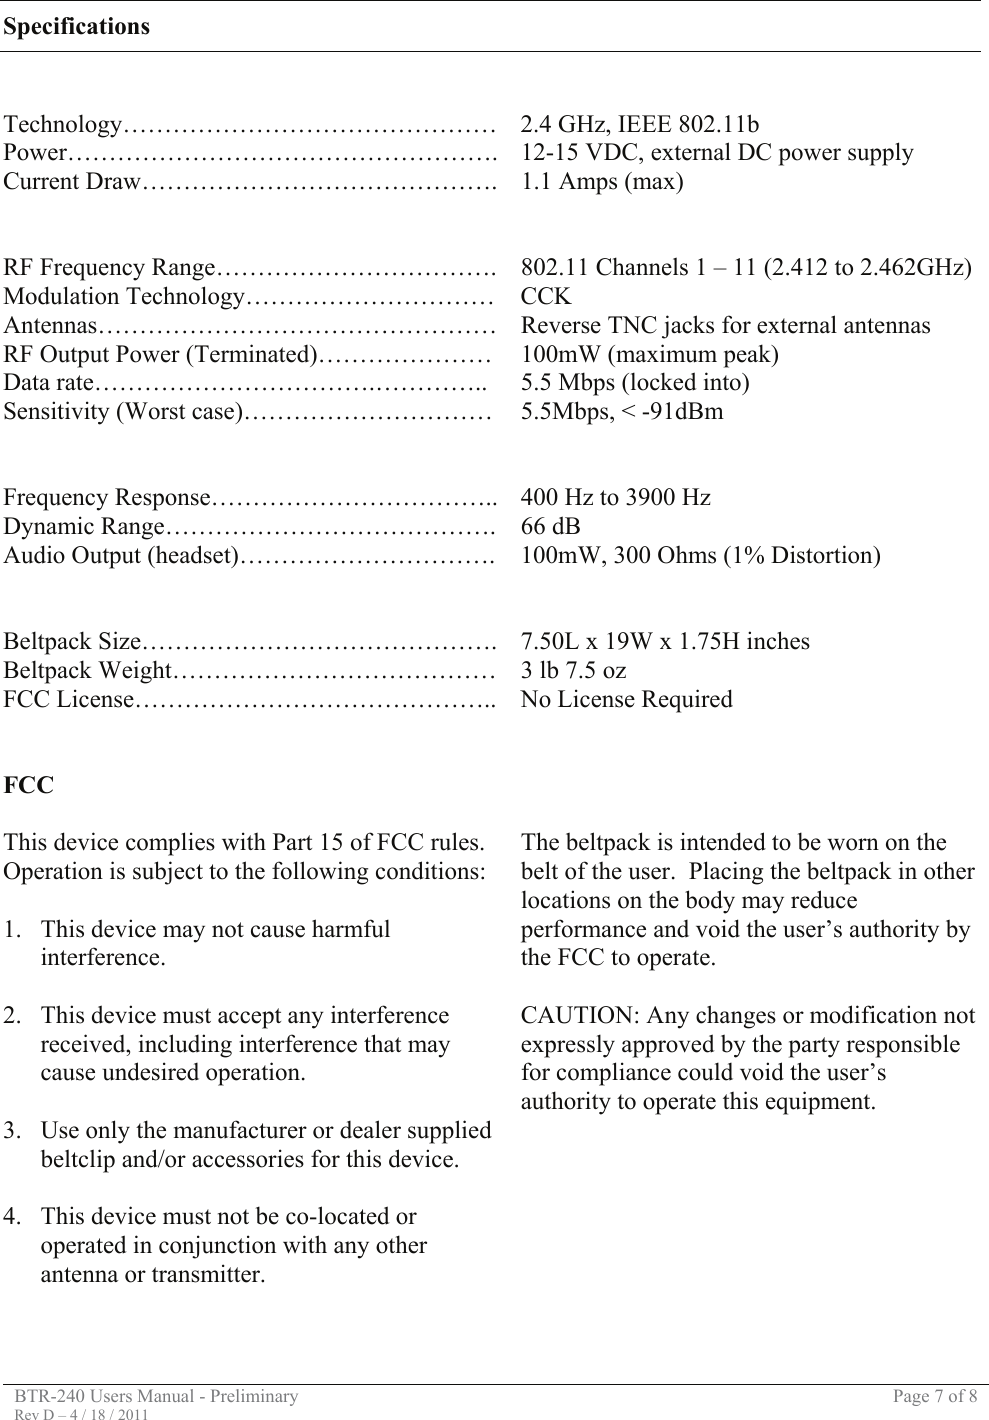 BTR-240 Users Manual - Preliminary  Page 7 of 8 Rev D – 4 / 18 / 2011  Specifications   Technology……………………………………… 2.4 GHz, IEEE 802.11b Power……………………………………………. 12-15 VDC, external DC power supply Current Draw……………………………………. 1.1 Amps (max)     RF Frequency Range…………………………….  802.11 Channels 1 – 11 (2.412 to 2.462GHz) Modulation Technology…………………………  CCK Antennas………………………………………… Reverse TNC jacks for external antennas RF Output Power (Terminated)…………………  100mW (maximum peak) Data rate…………………………….…………..  5.5 Mbps (locked into) Sensitivity (Worst case)…………………………  5.5Mbps, &lt; -91dBm     Frequency Response…………………………….. 400 Hz to 3900 Hz Dynamic Range………………………………….  66 dB Audio Output (headset)………………………….  100mW, 300 Ohms (1% Distortion)     Beltpack Size……………………………………. 7.50L x 19W x 1.75H inches Beltpack Weight…………………………………  3 lb 7.5 oz FCC License……………………………………..  No License Required    FCC  This device complies with Part 15 of FCC rules.  Operation is subject to the following conditions:  1. This device may not cause harmful interference.  2. This device must accept any interference received, including interference that may cause undesired operation.  3. Use only the manufacturer or dealer supplied beltclip and/or accessories for this device.  4. This device must not be co-located or operated in conjunction with any other antenna or transmitter.    The beltpack is intended to be worn on the belt of the user.  Placing the beltpack in other locations on the body may reduce performance and void the user’s authority by the FCC to operate.  CAUTION: Any changes or modification not expressly approved by the party responsible for compliance could void the user’s authority to operate this equipment.          